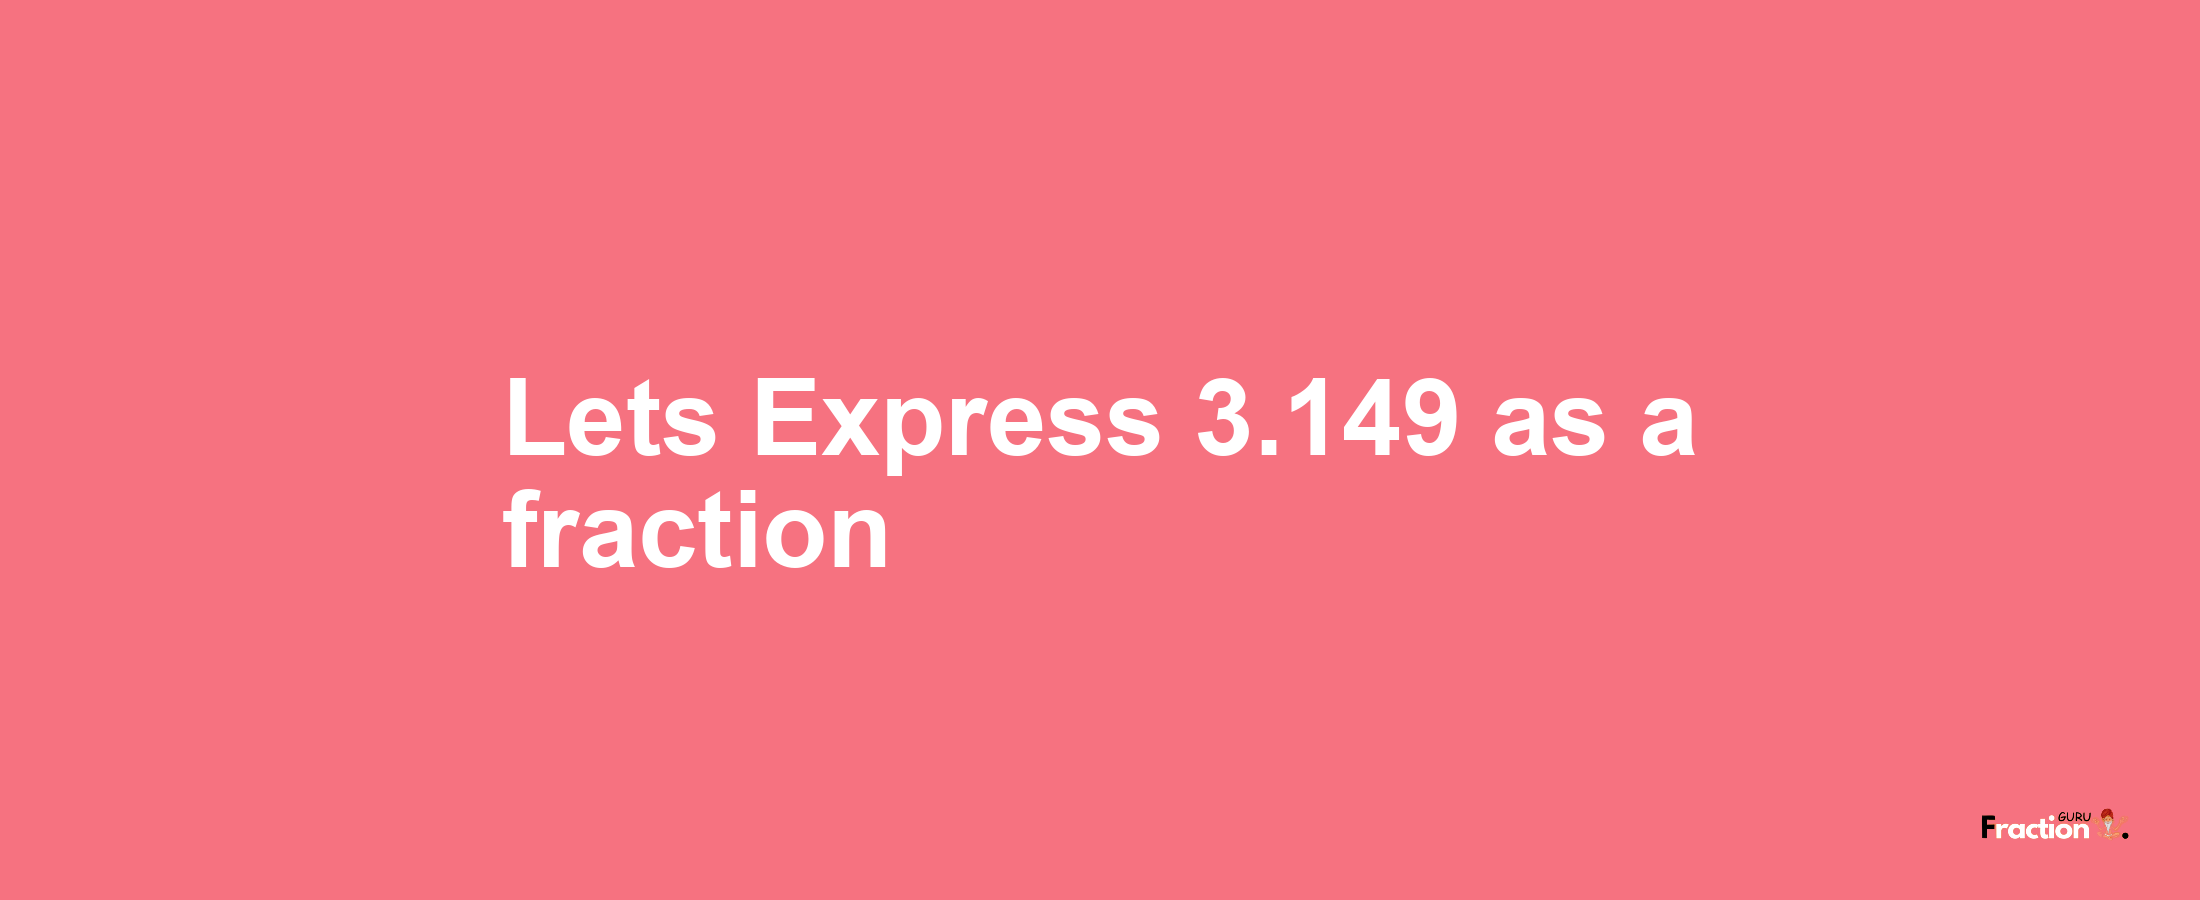 Lets Express 3.149 as afraction